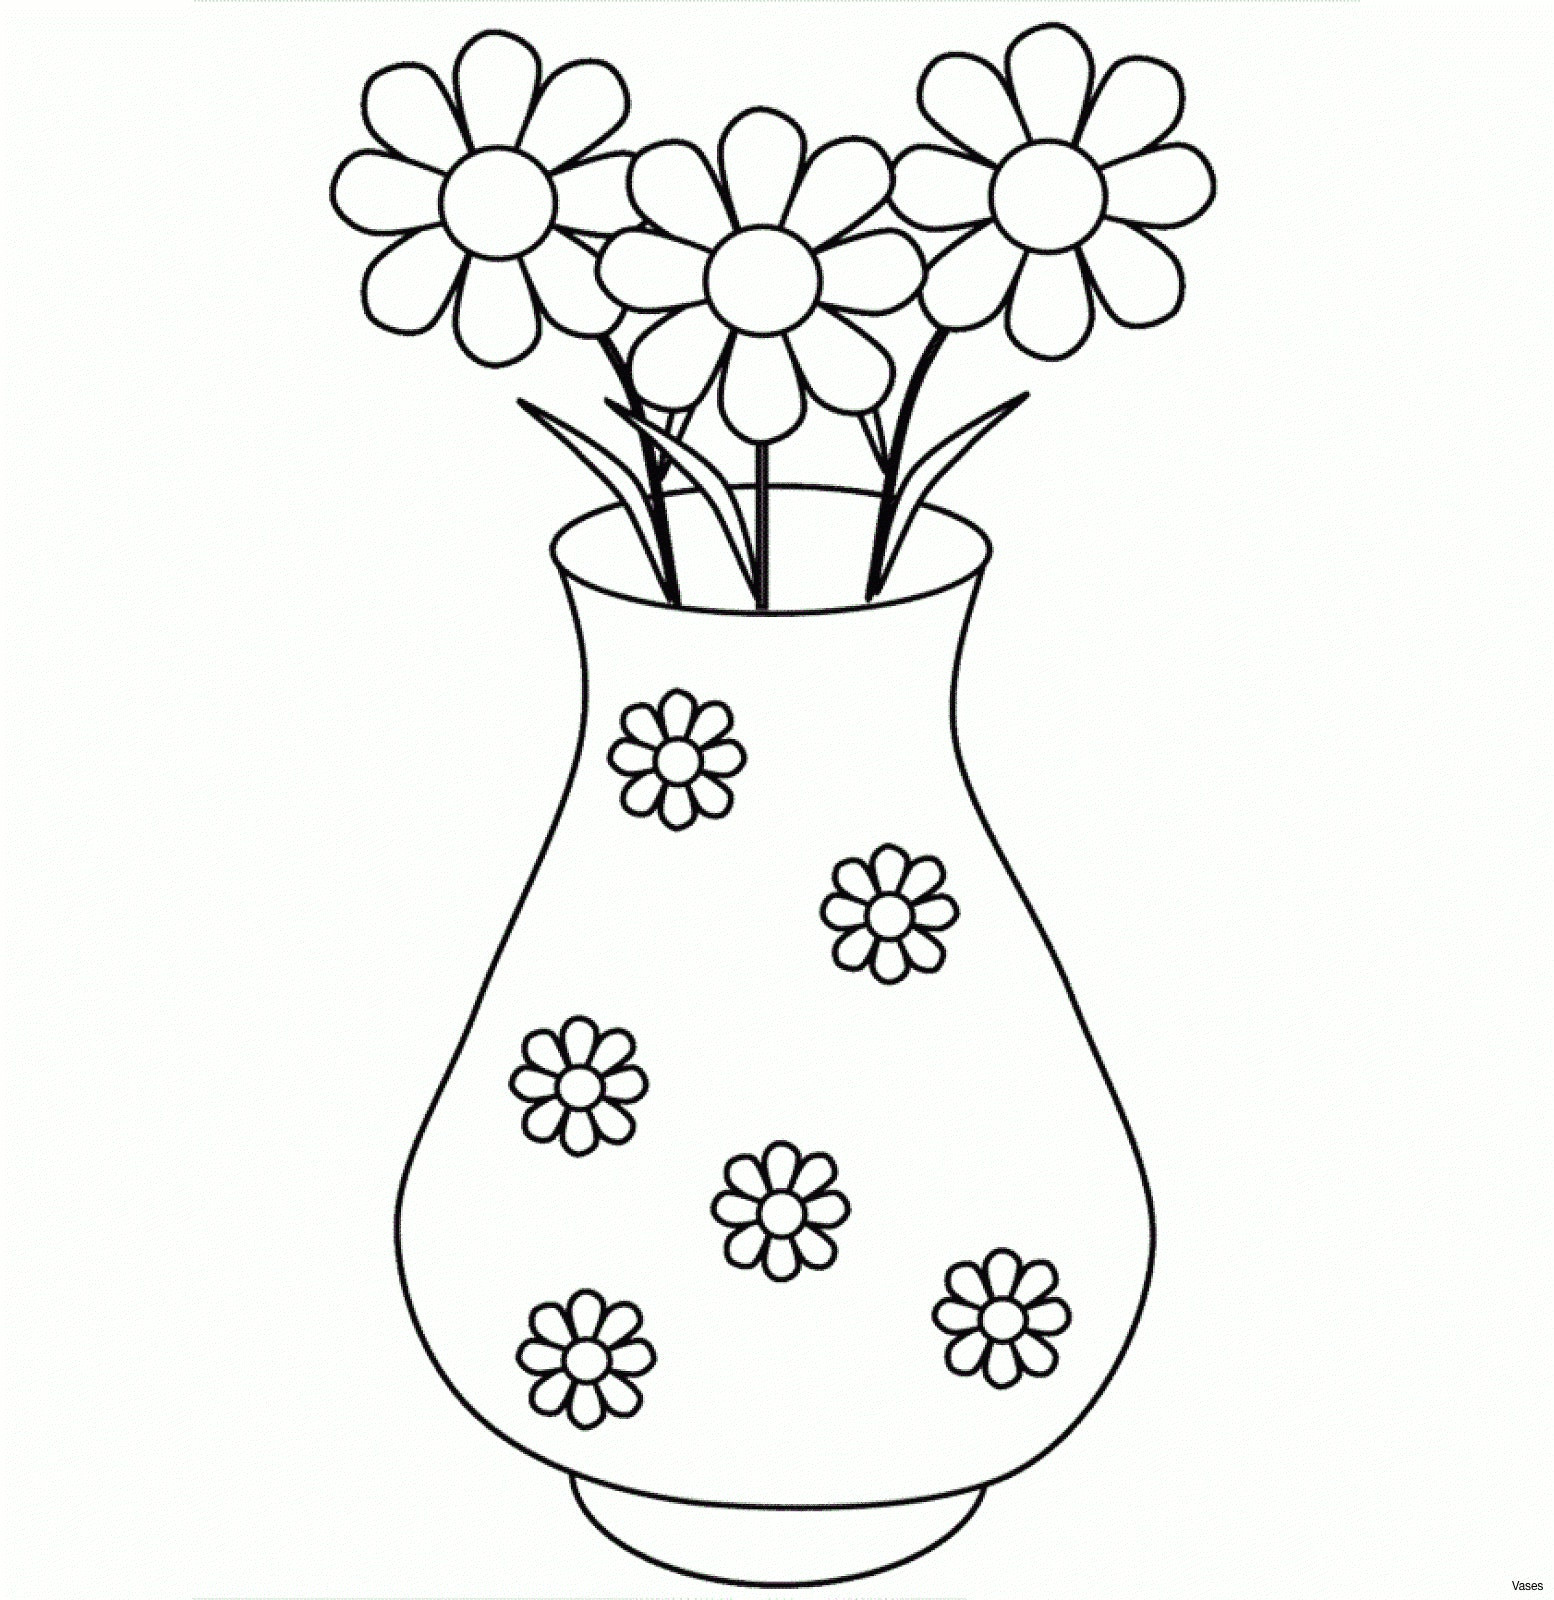 images of easy drawings 50 awesome collection sketch for kids of images of easy drawings vase